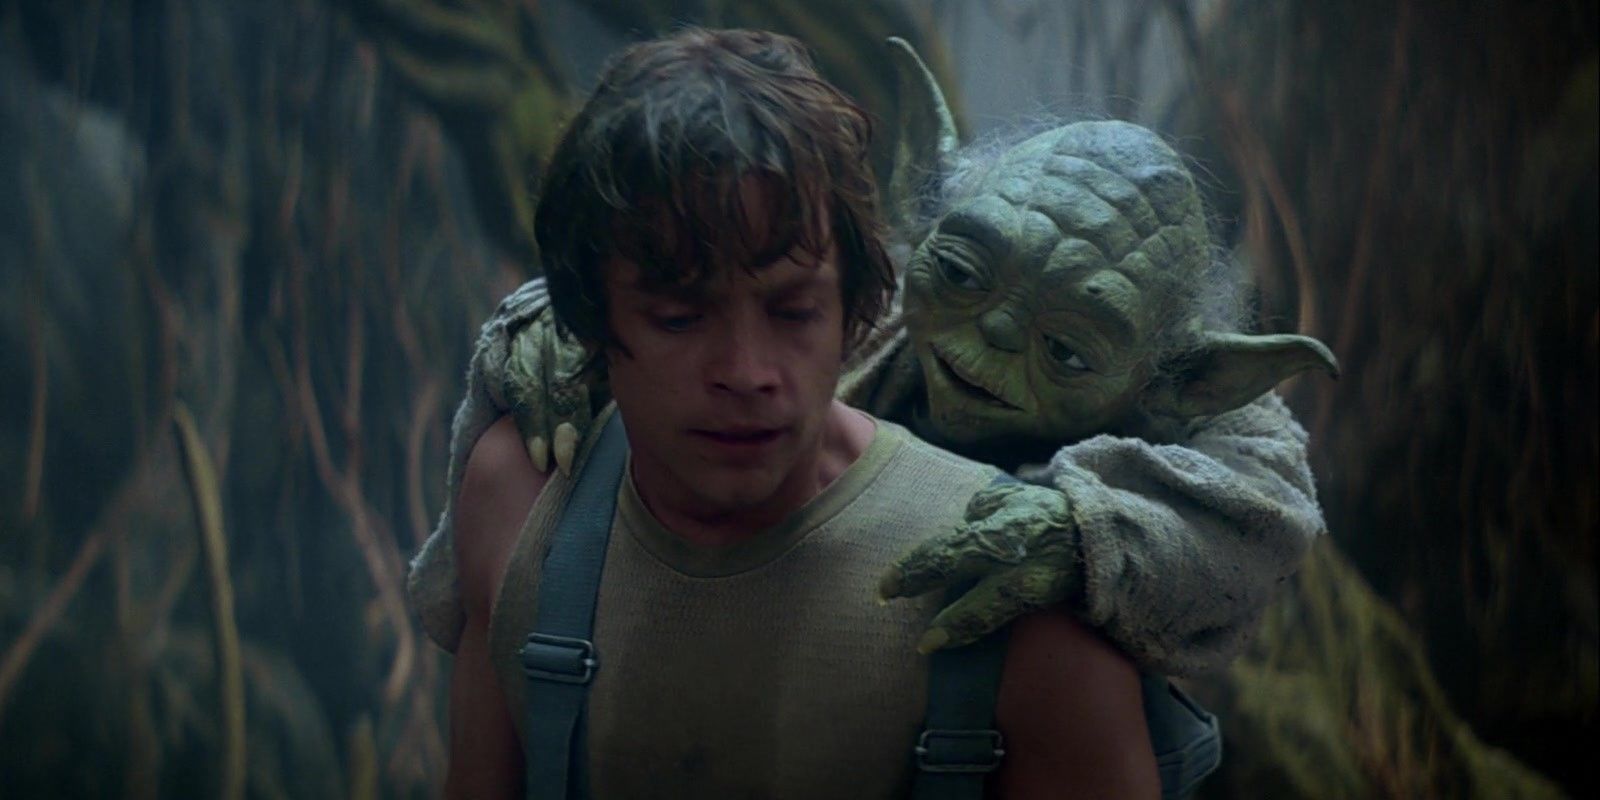 Yoda rides on Luke Skywalker's (Mark Hamill) back as he runs through the swamps of Dagobah as part of his Jedi training in Star Wars: Episode V - The Empire Strikes Back